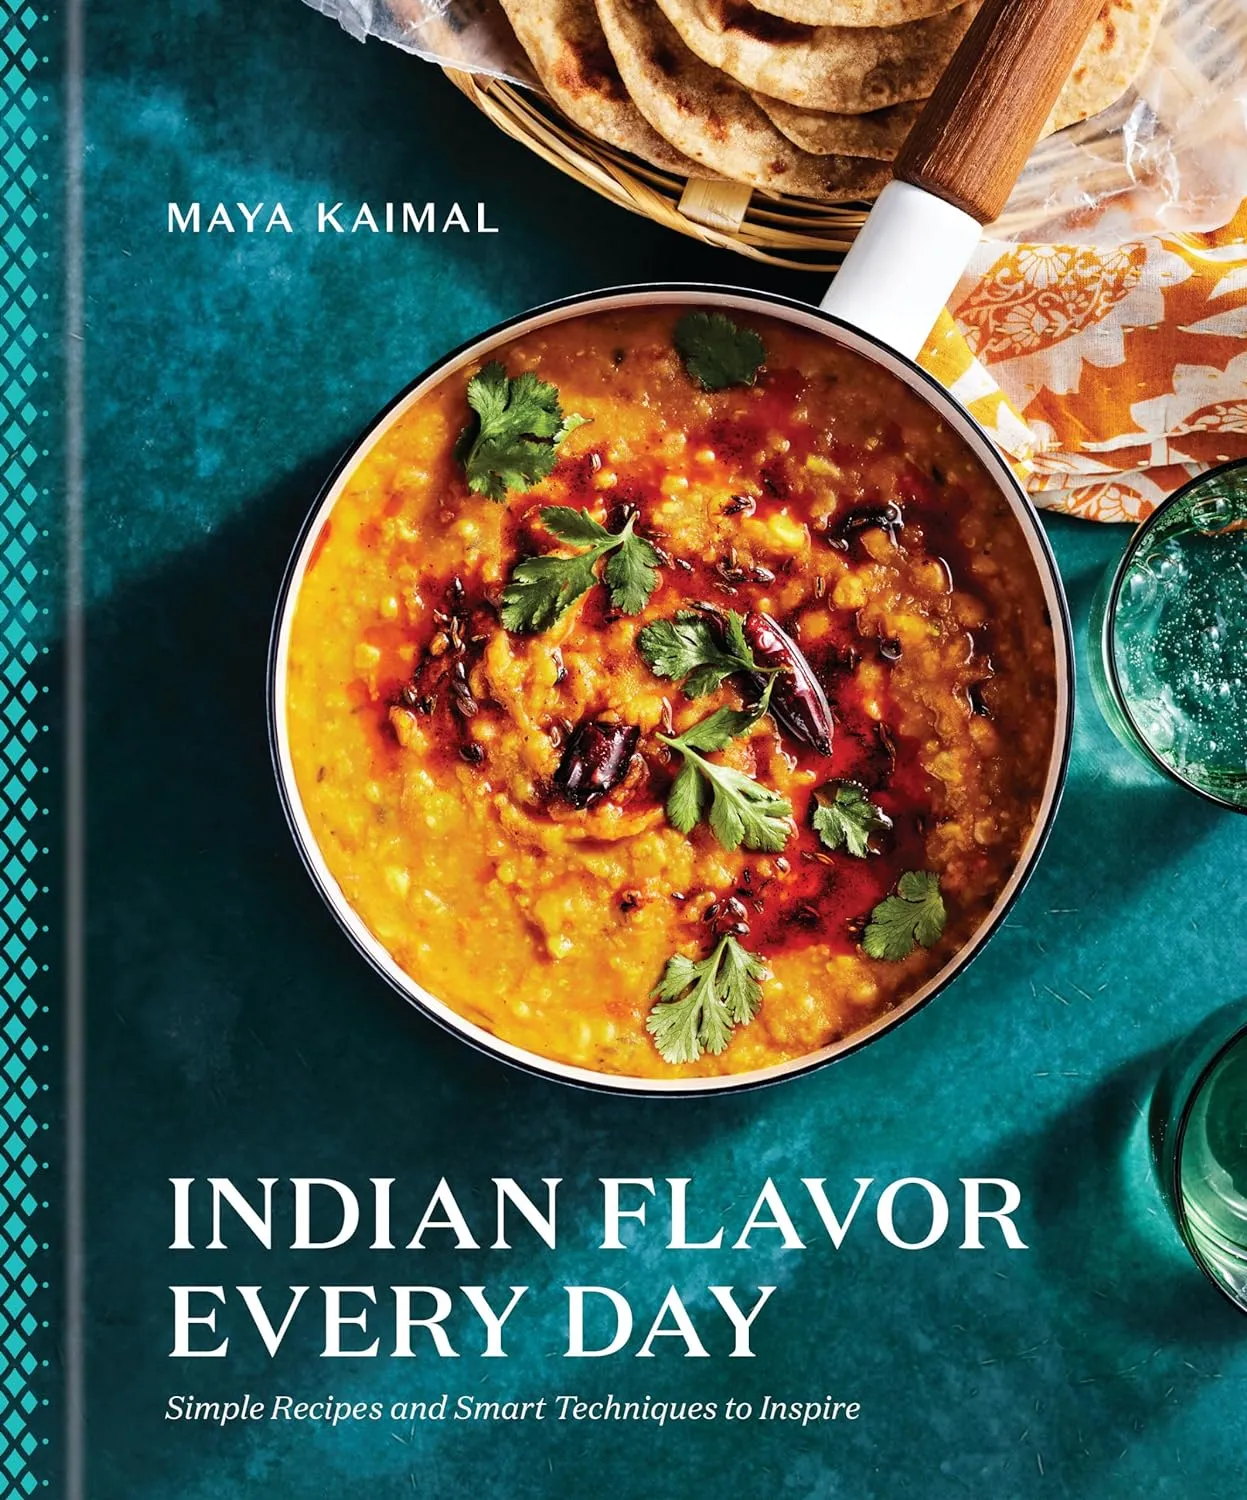 Indian flavor every day book cover